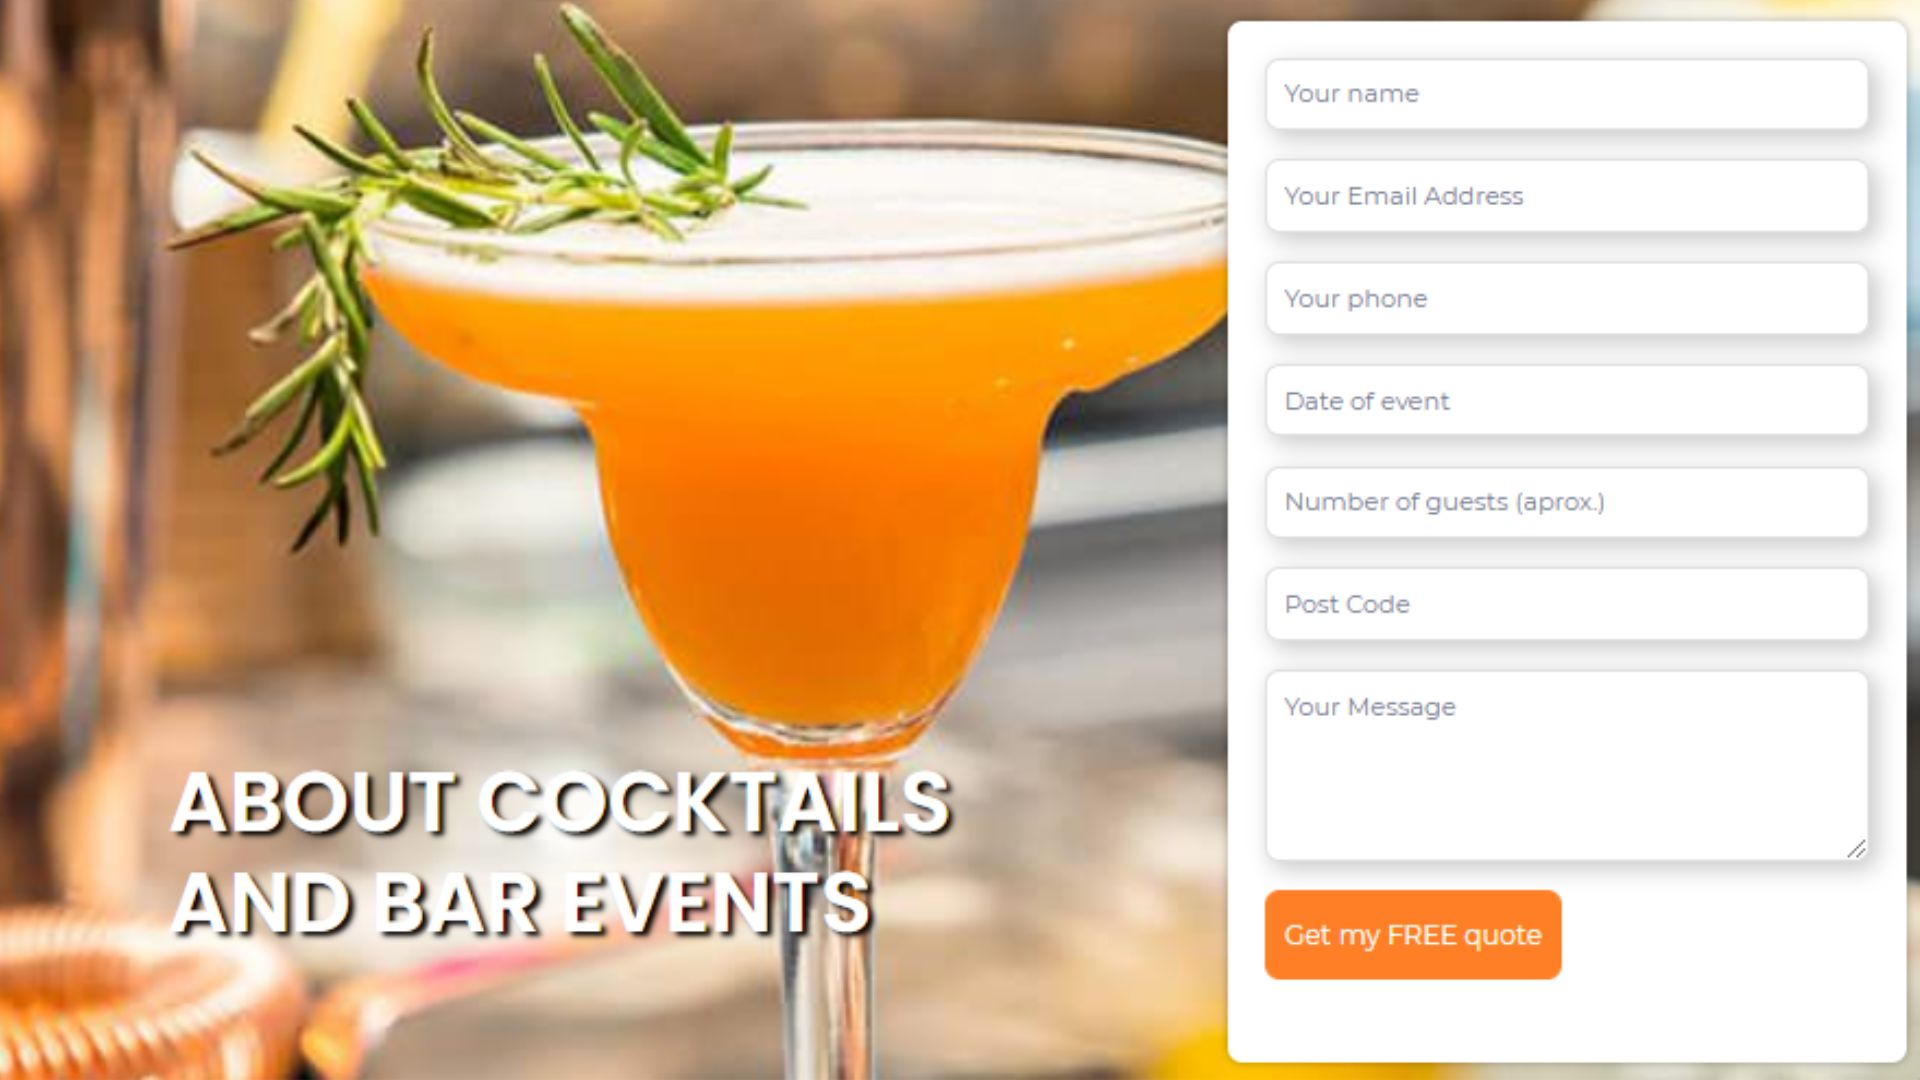 What Types of Events Does Mobile Bar Hire Cater? -